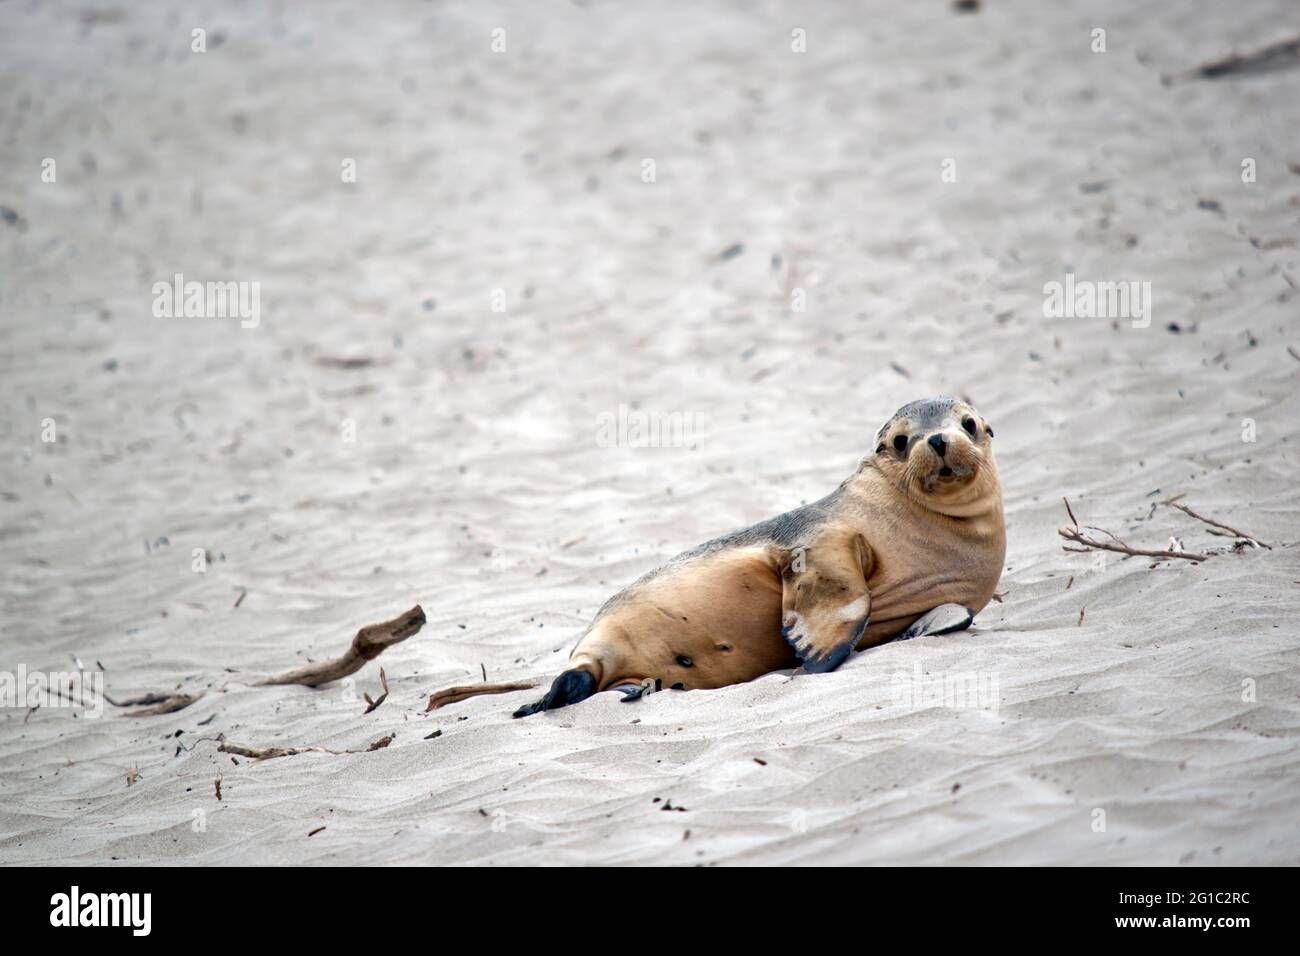 the sea lion pup is grey and white with black eyes and black flippers Stock Photo